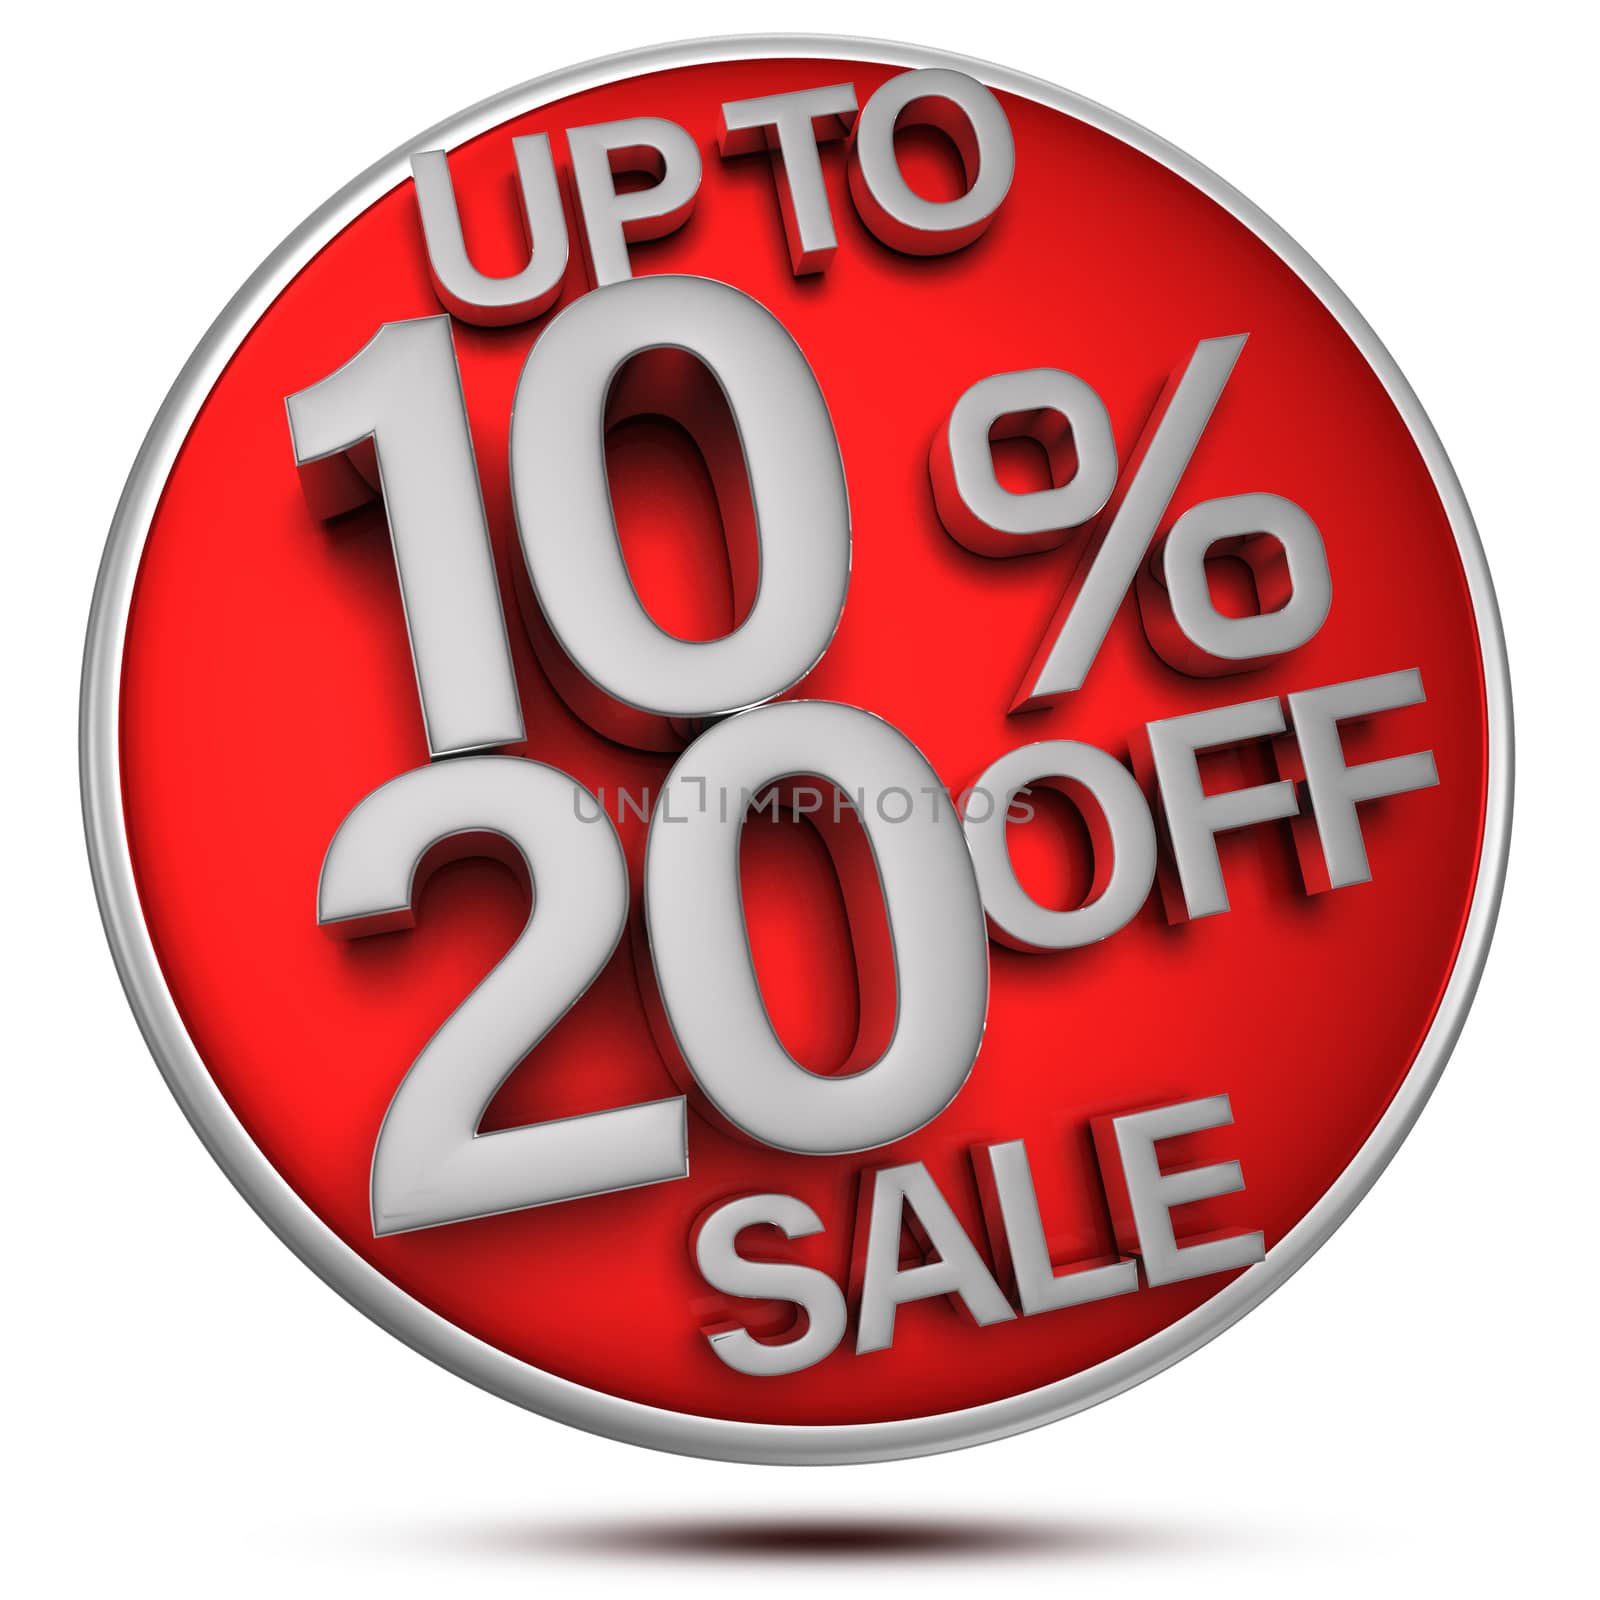 Up to 10-20% off sale 3d. by thitimontoyai